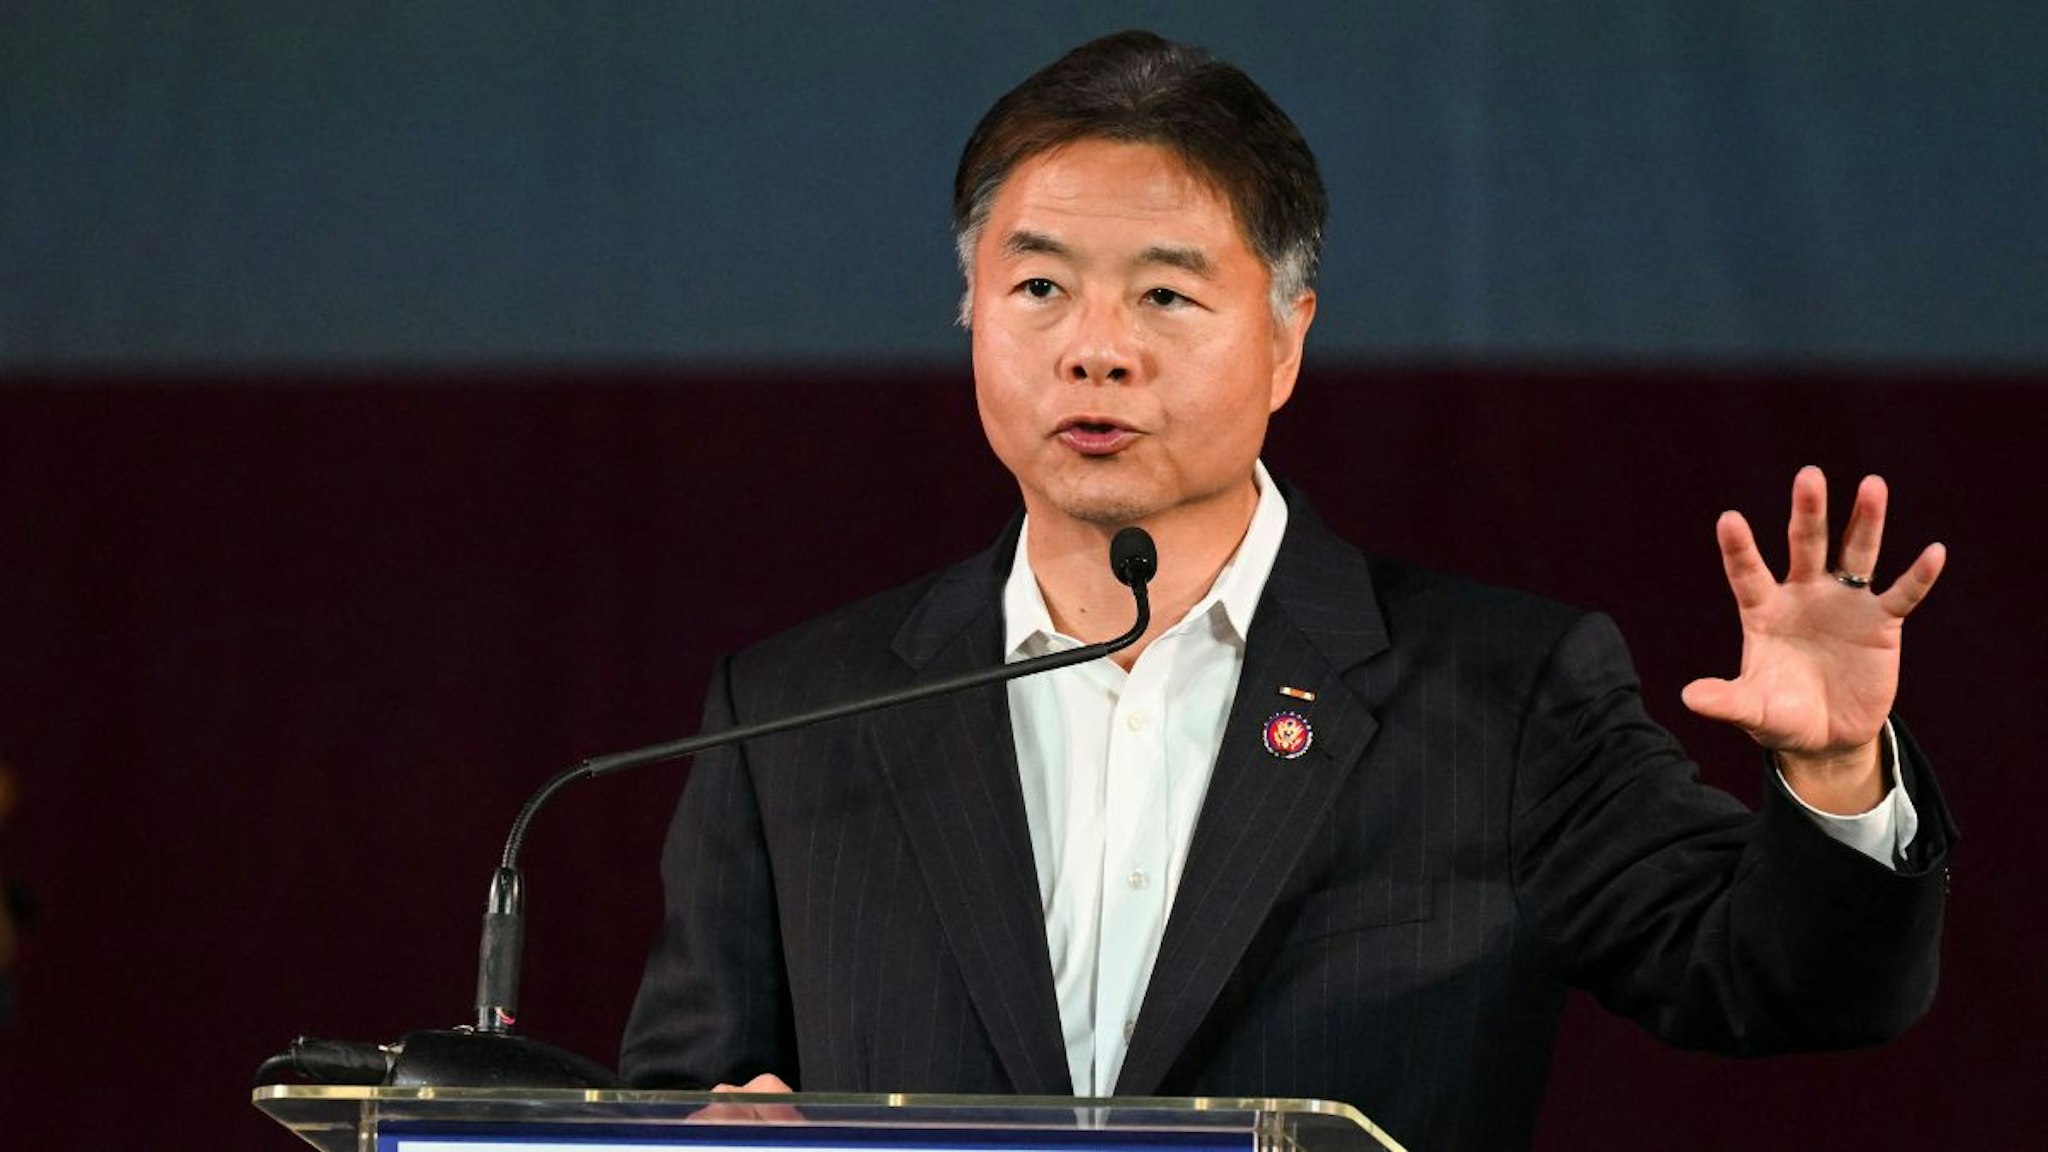 US Rep. Ted Lieu (D-CA) speaks during an election night party with the Los Angeles County Democratic Party at the Hollywood Palladium in Los Angeles, November 8, 2022.